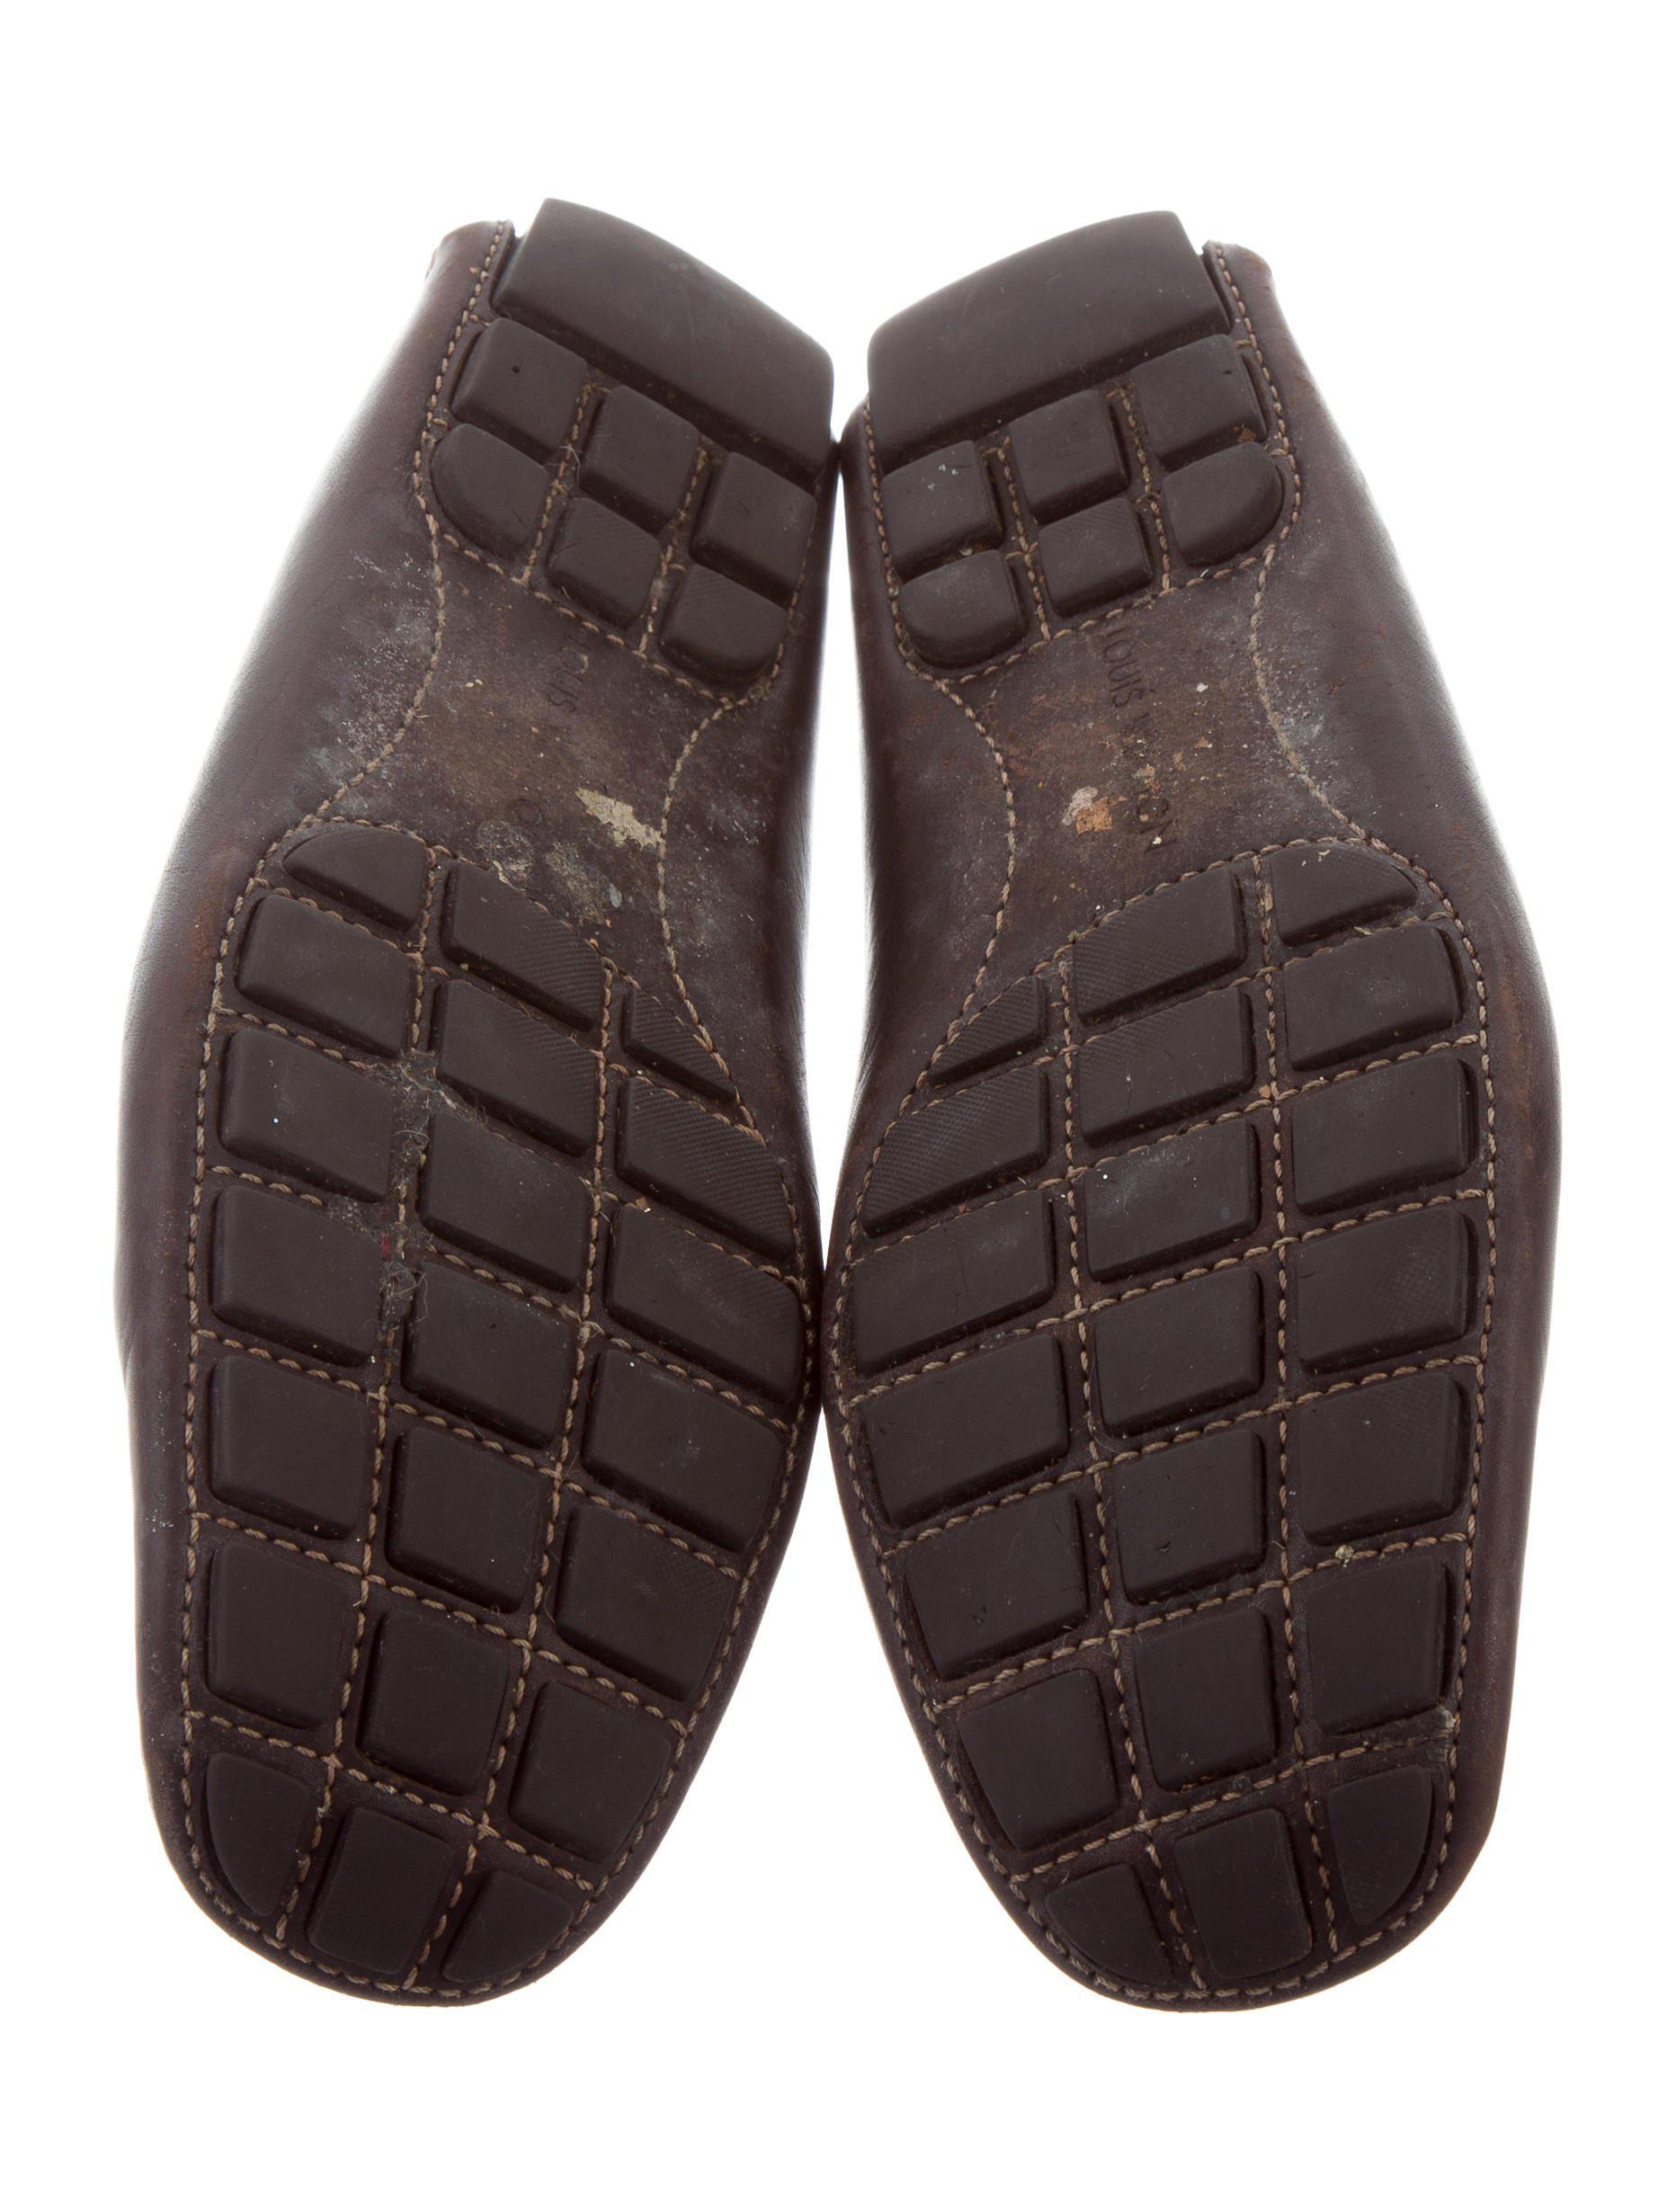 Lyst - Louis Vuitton Monte Carlo Initiales Driving Loafers Brown in Brown for Men